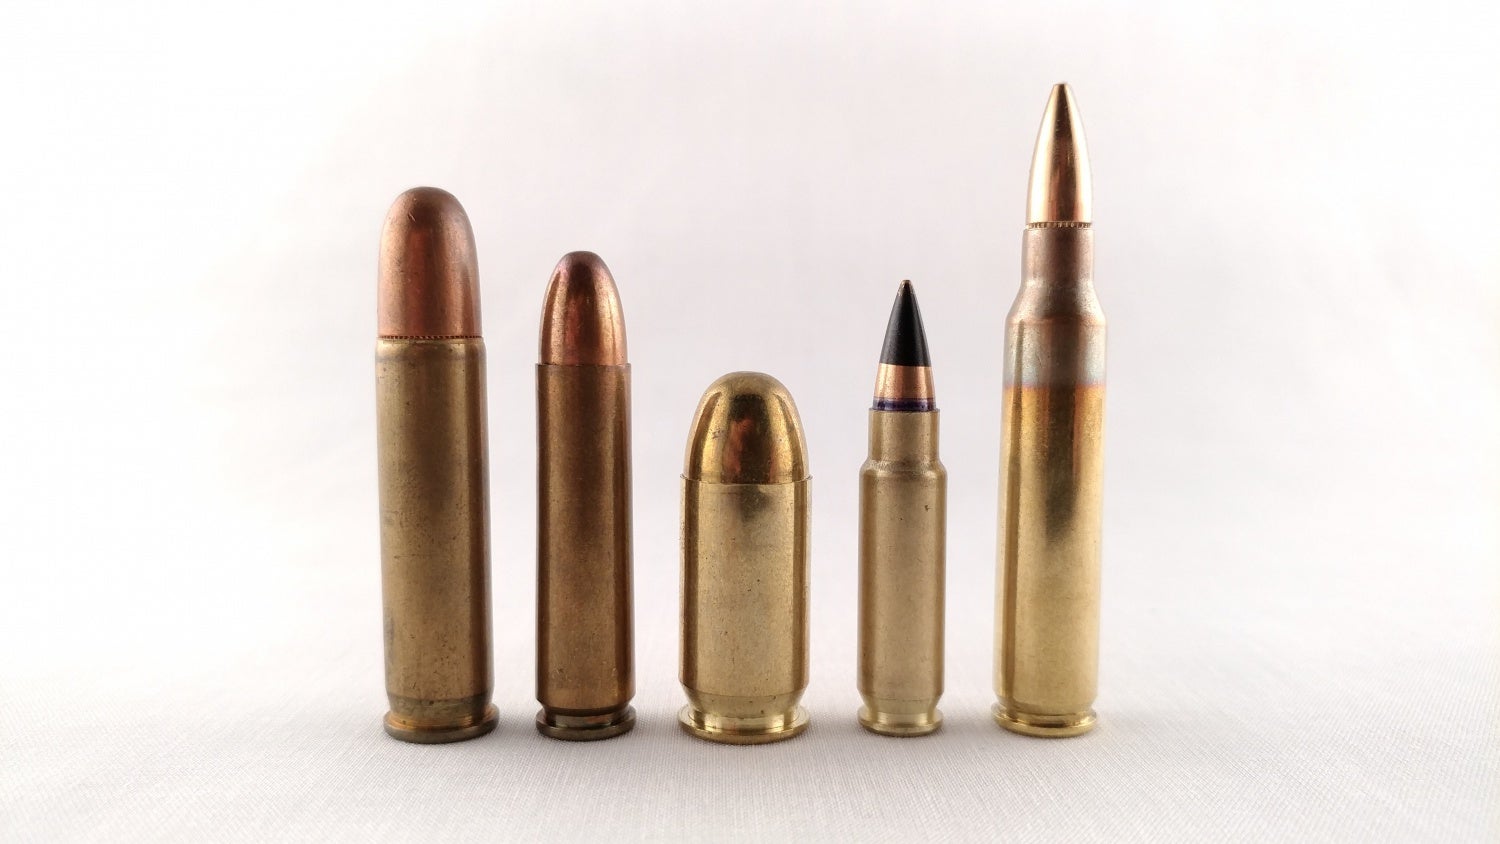 Left to right: .351 WSL, .30 M1 Carbine, .45 ACP, 5.7x28mm SS190, 5.56x45mm...